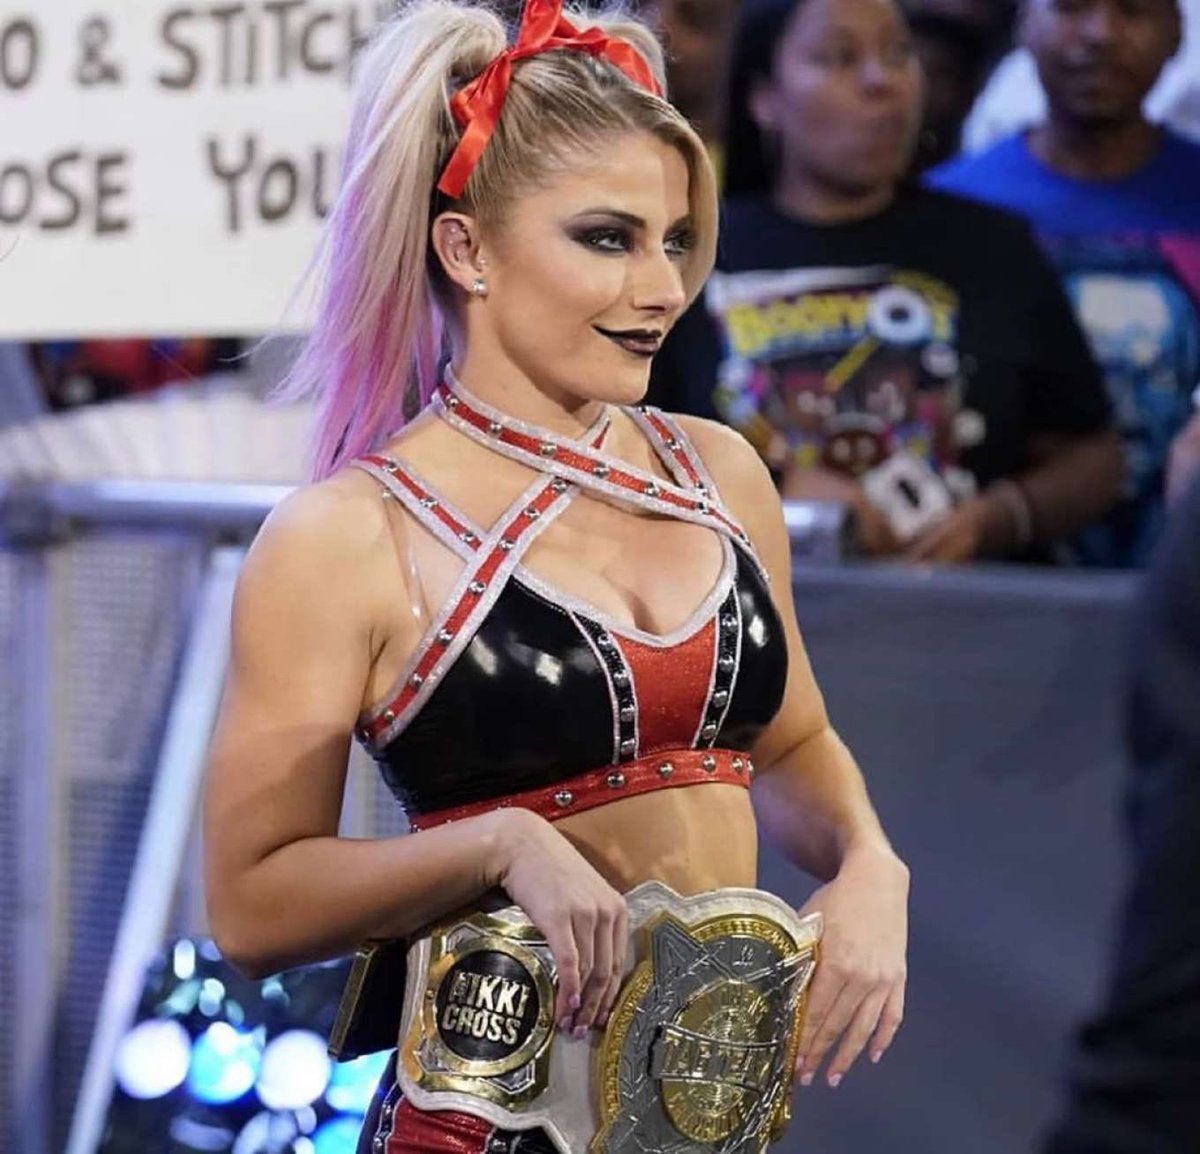 2. clash of champions 2019. this look was flawless and should have had hd pictures. great reuse of old gear by changing her style. goth queen.